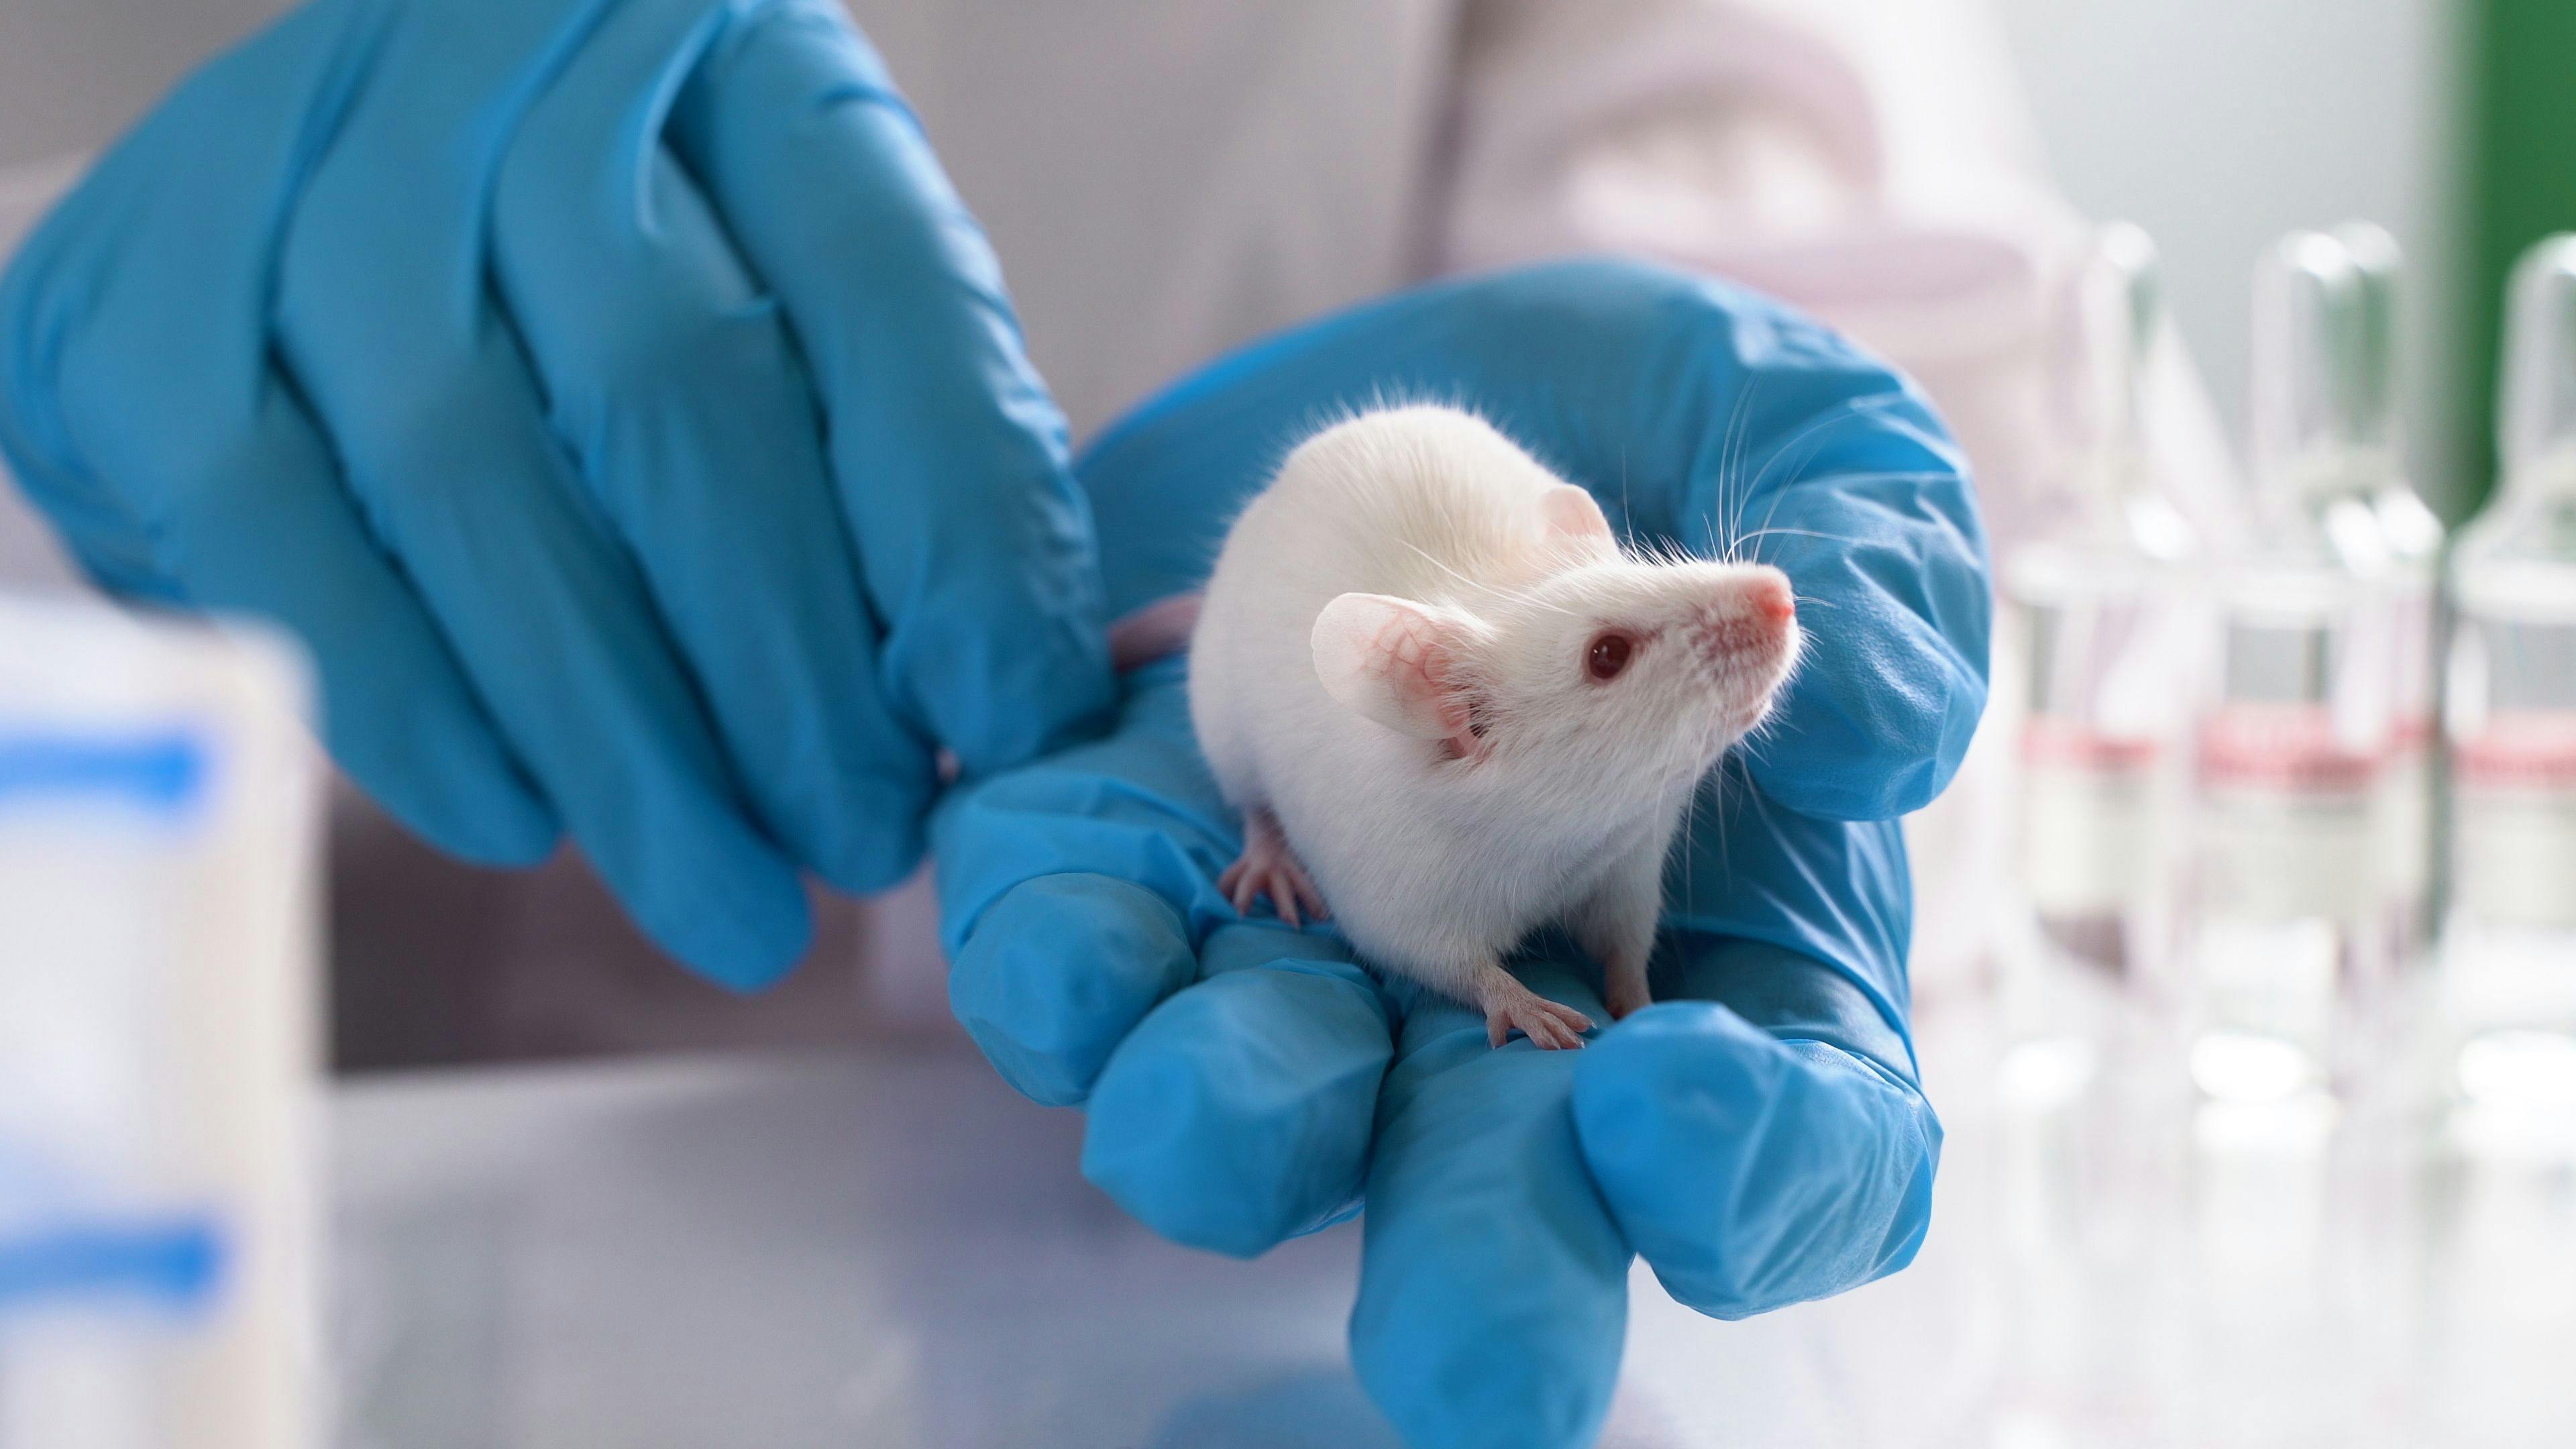 Clothianidin Exposure Suppresses Early Symptoms of AD in Mouse Model Study